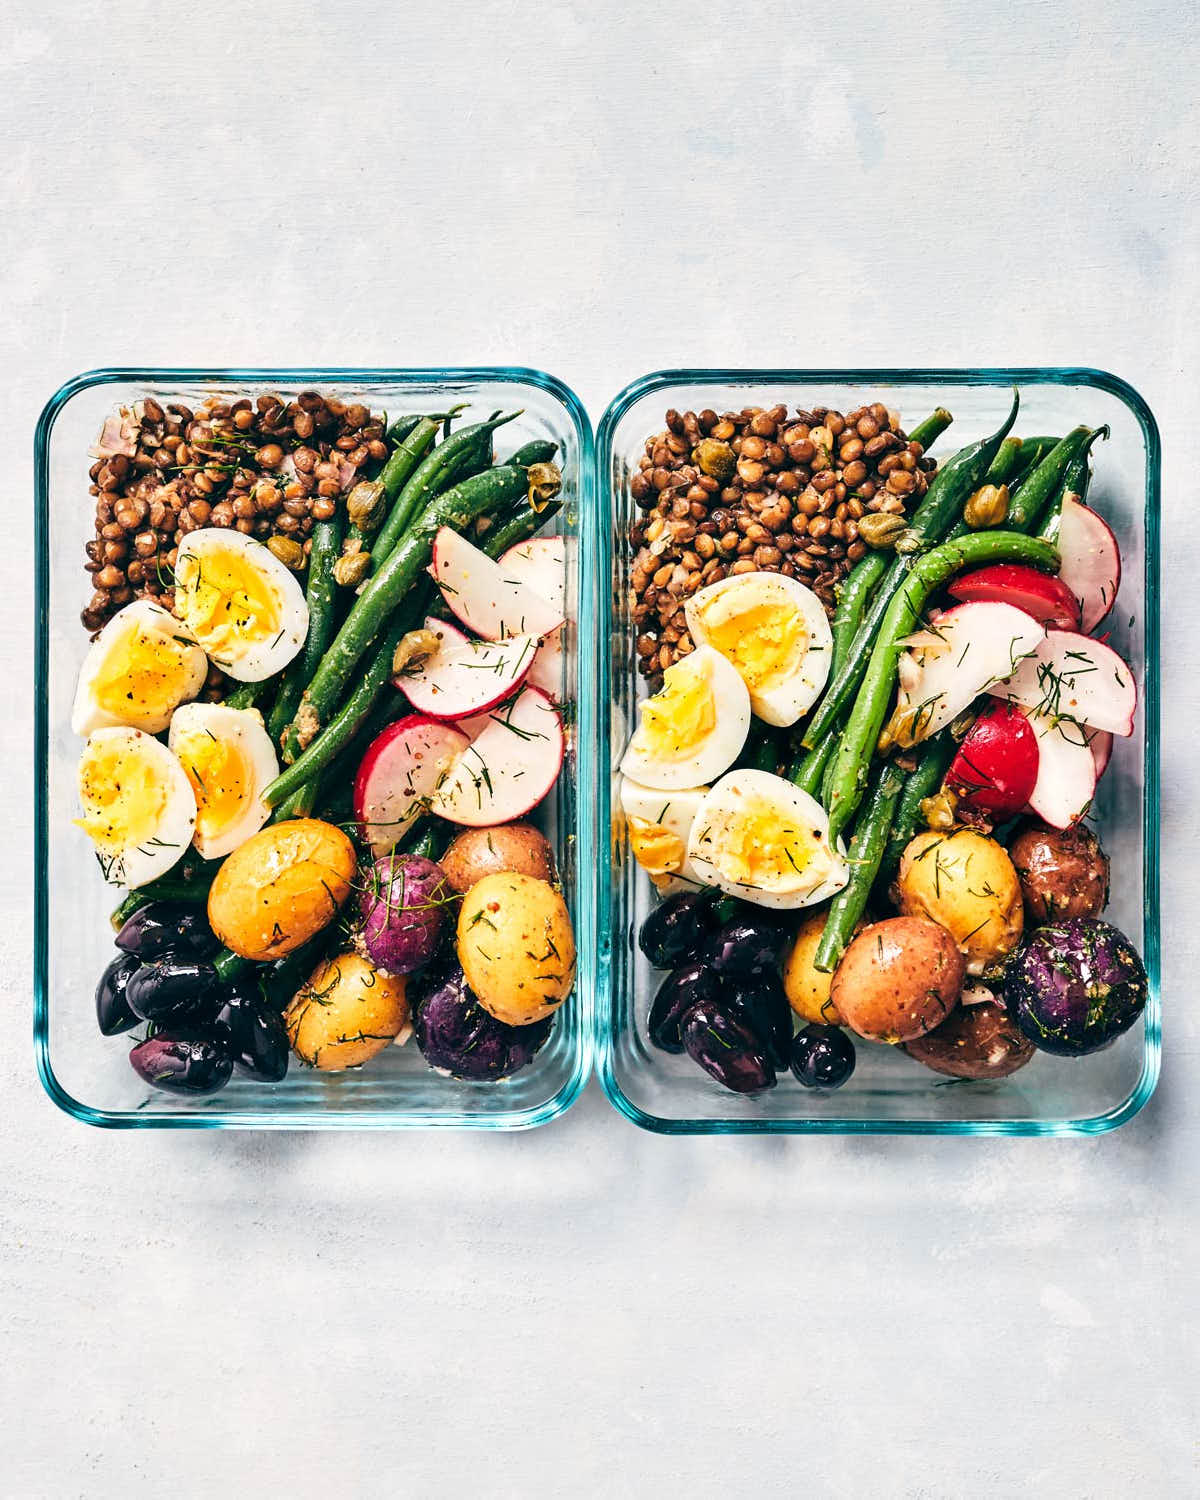 Two pyrex containers of nicoise salad ready to packed away for a meal prepped lunch